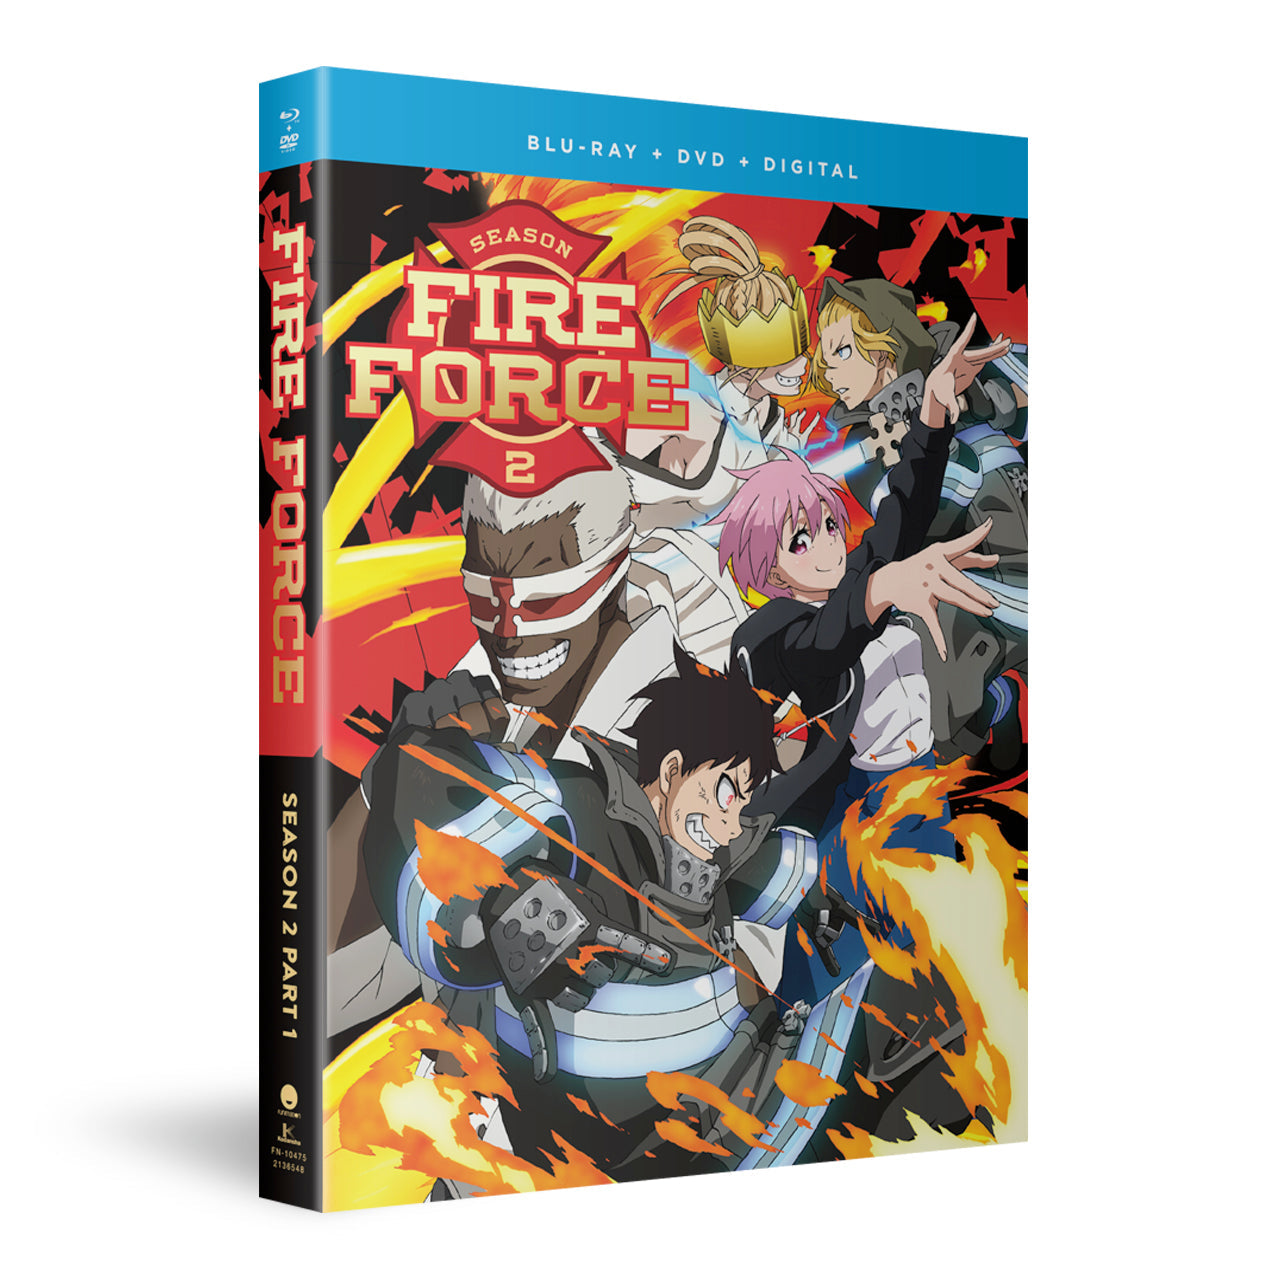 Fire Force - Season 2 Part 1 - Blu-ray + DVD image count 2